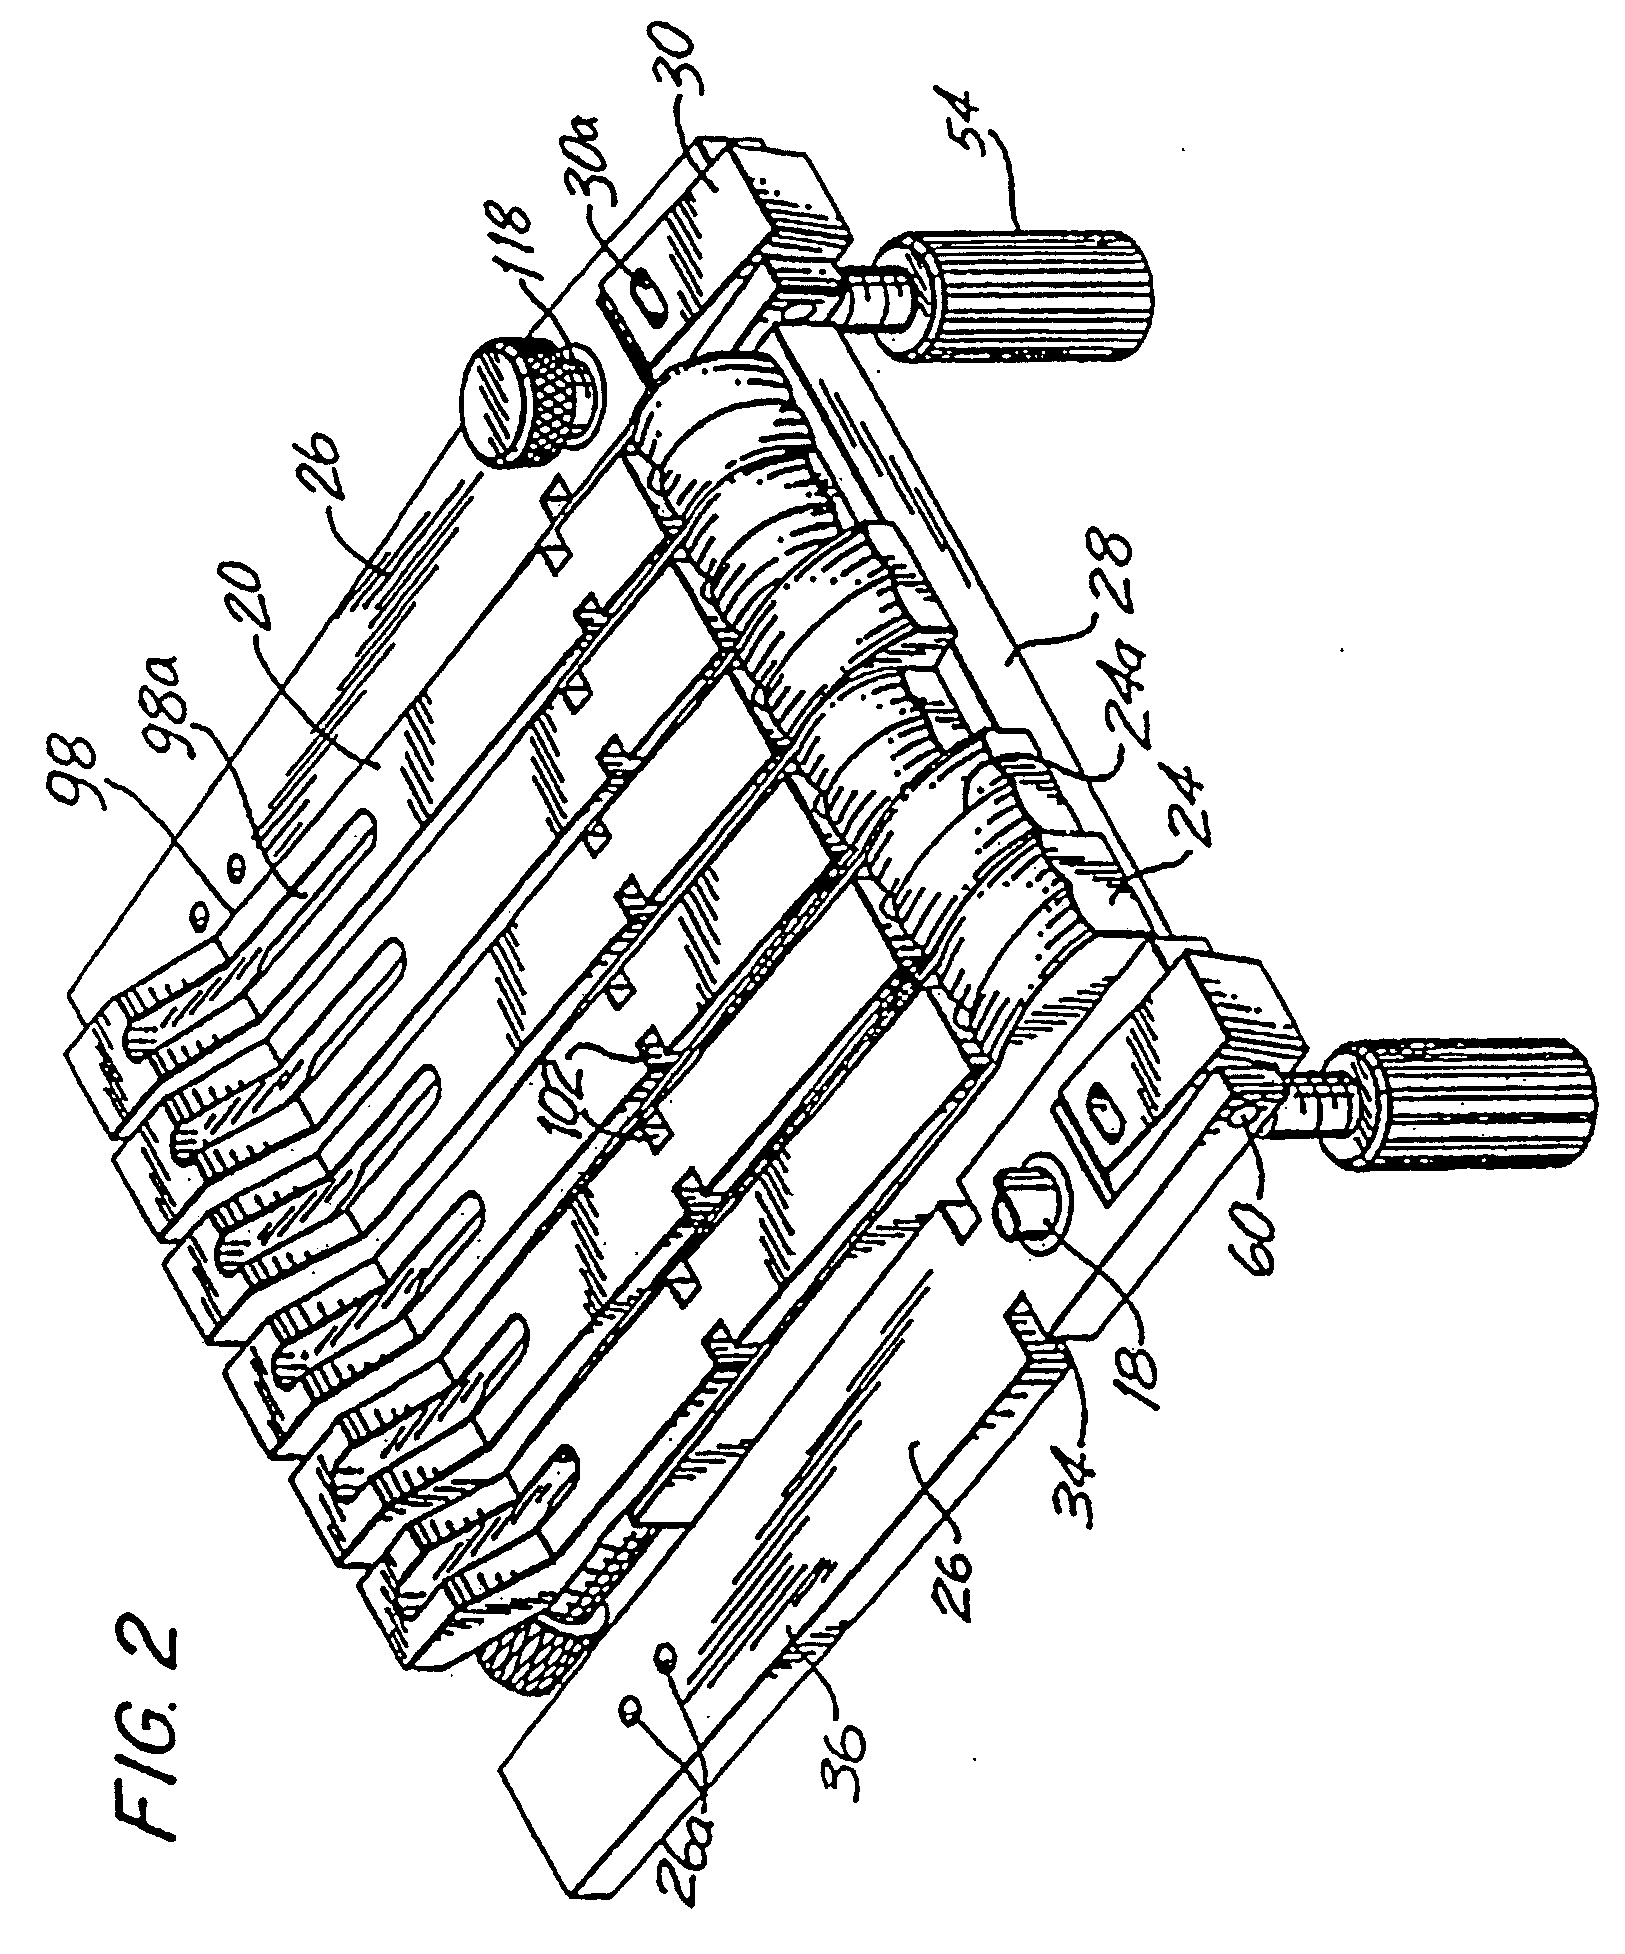 Systems, methods and apparatus for a stringed musical instrument